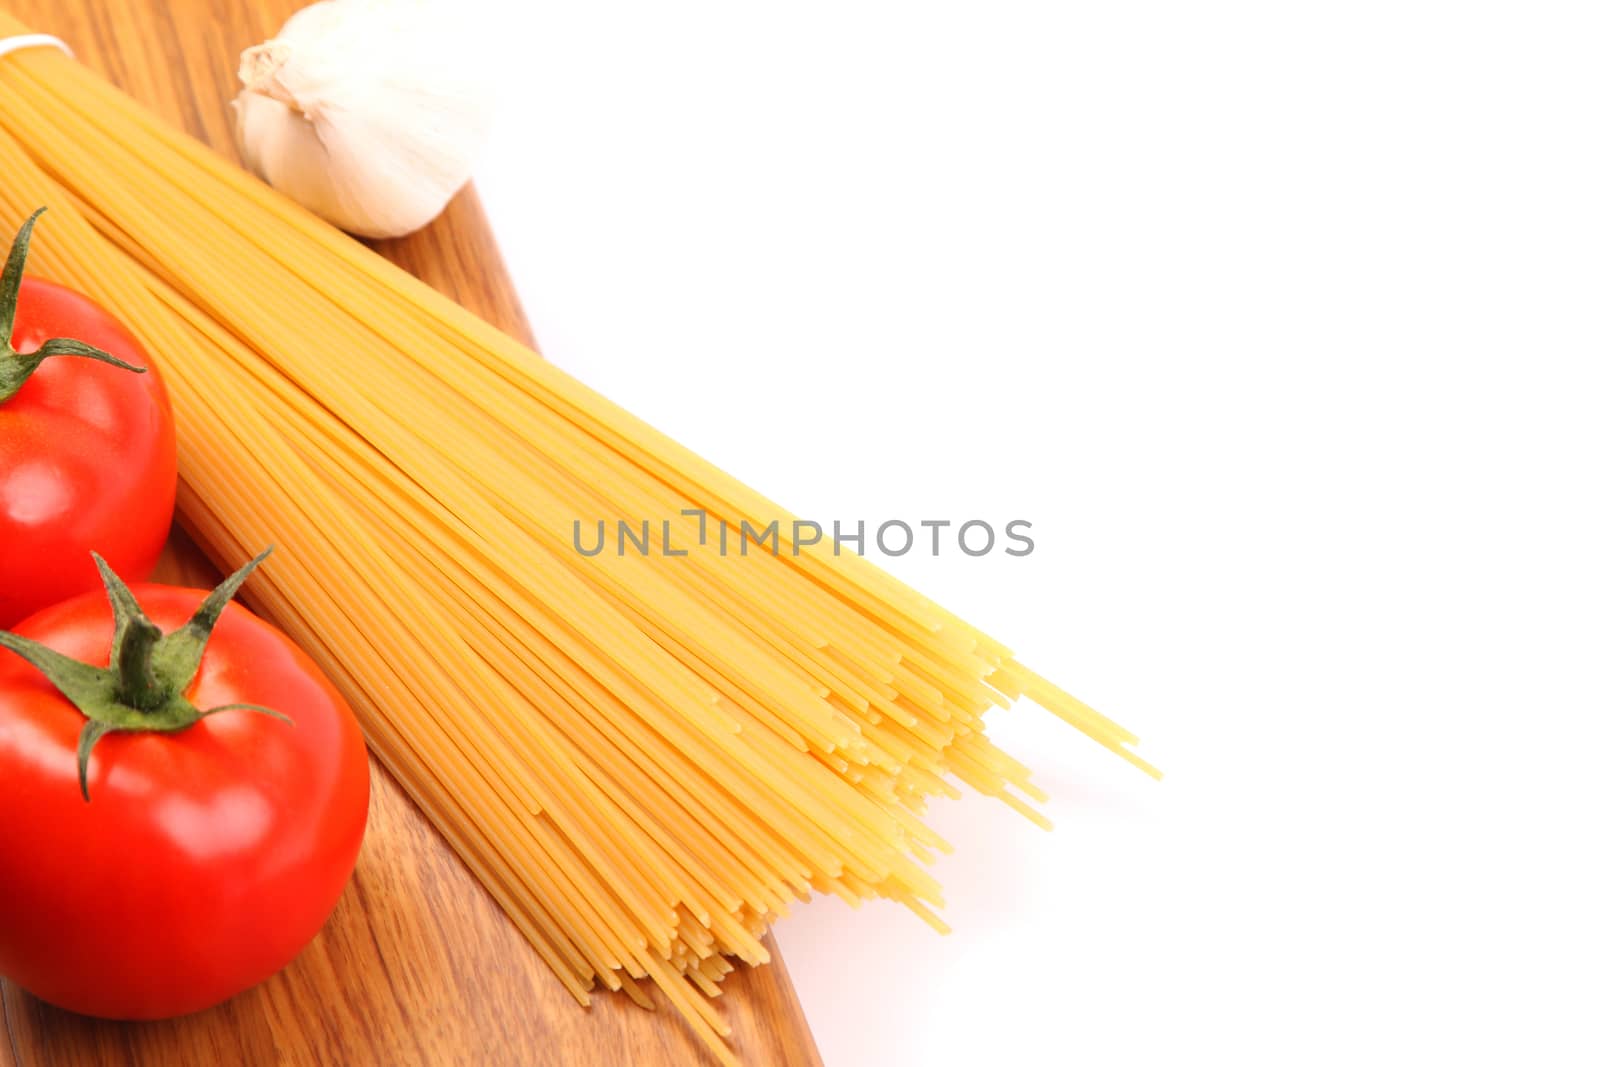 uncooked spaghetti and tomatos are located right on a white background